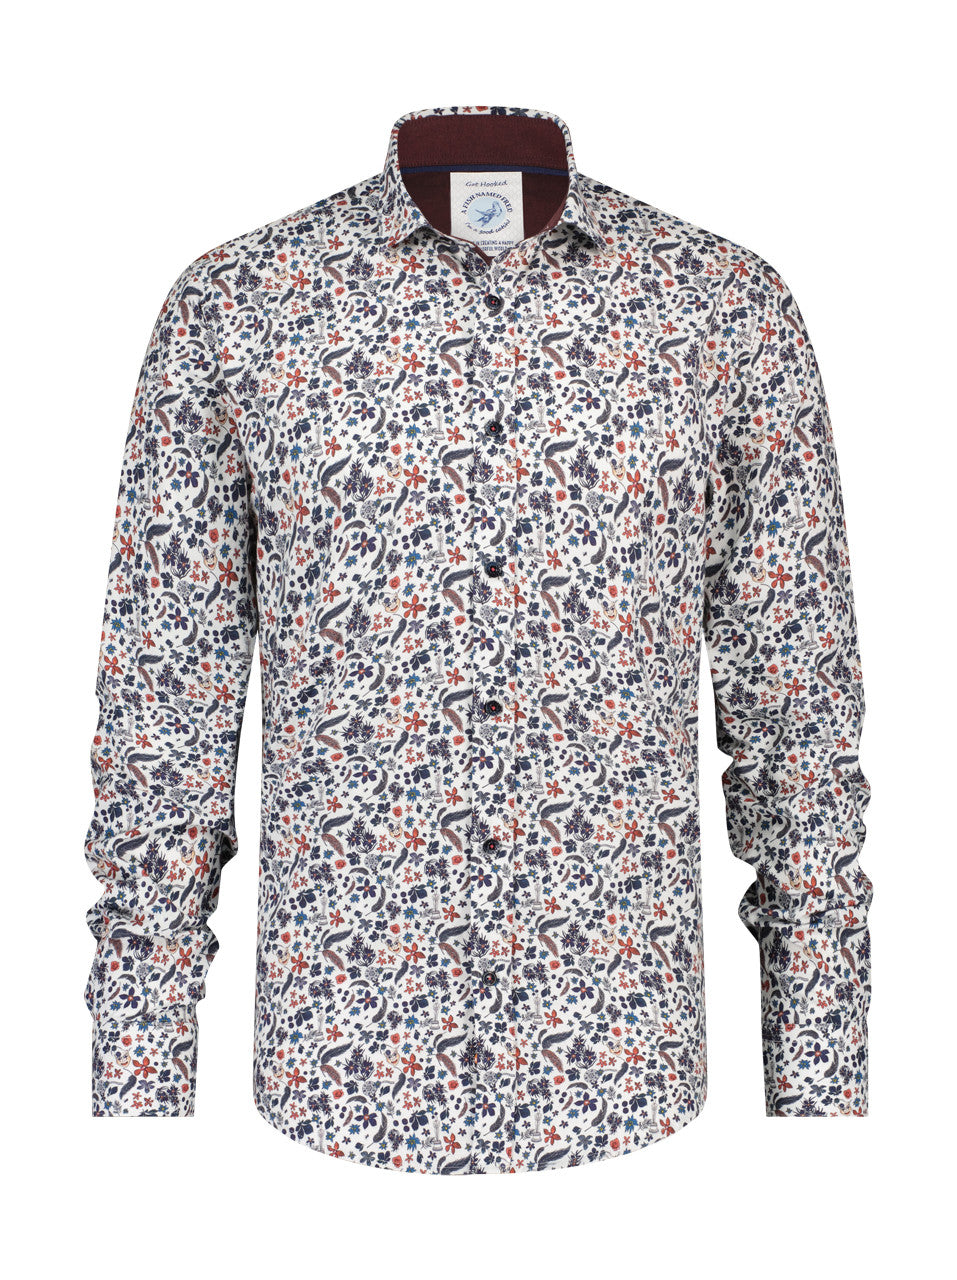 A Fish Named Fred Men's Shirt Flower Crowd